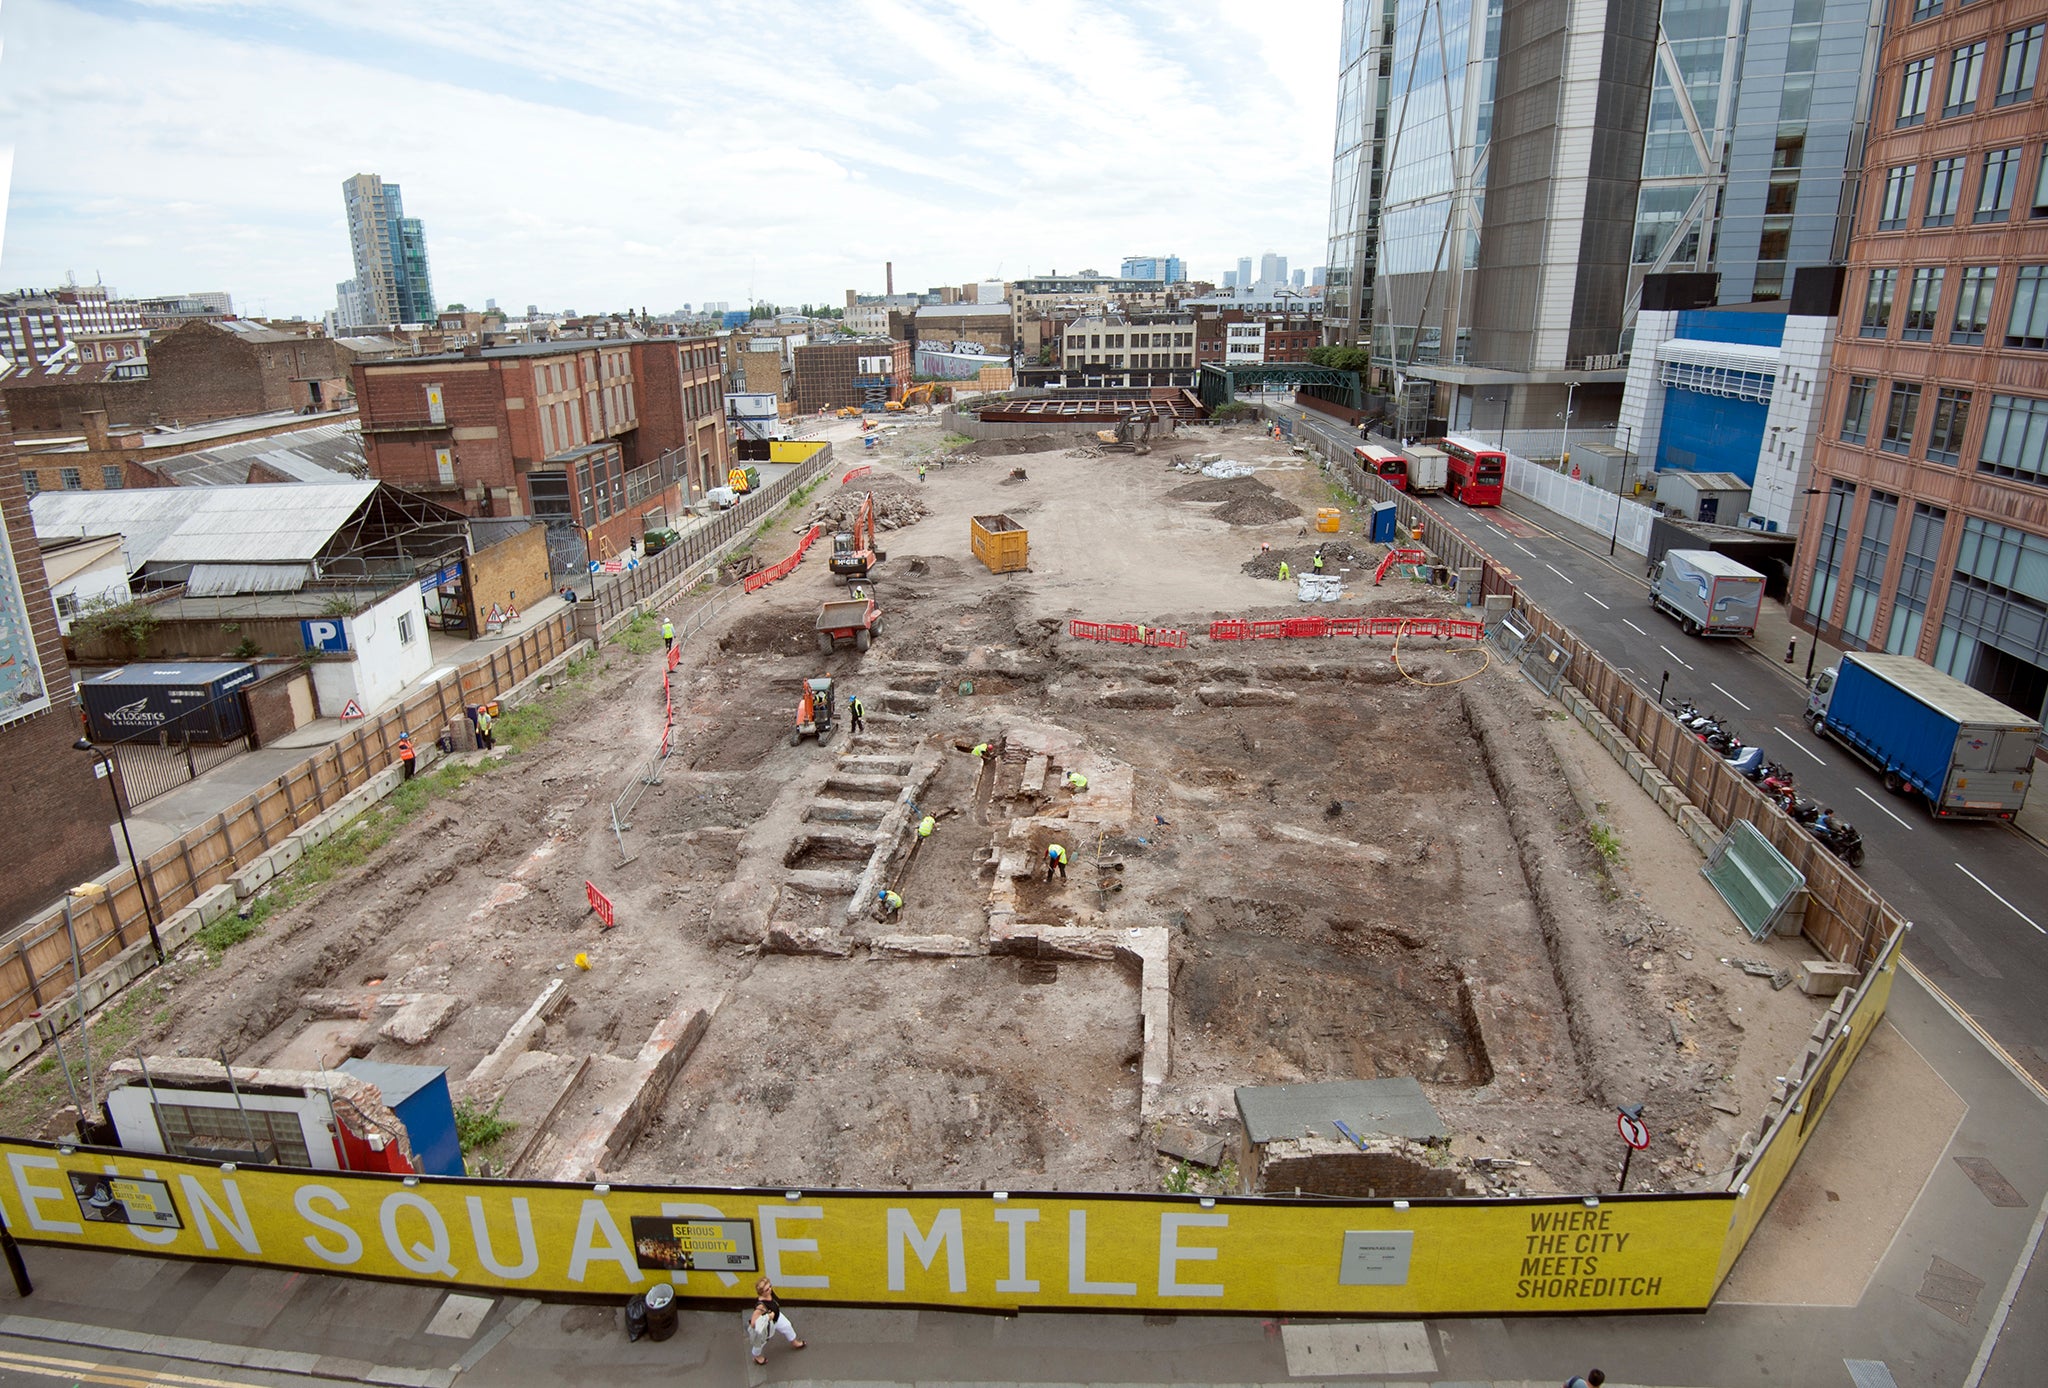 An aerial view of MOLA archaeologists excavating at Principal Place in Shoreditch - the site of the new Amazon HQ © MOLA